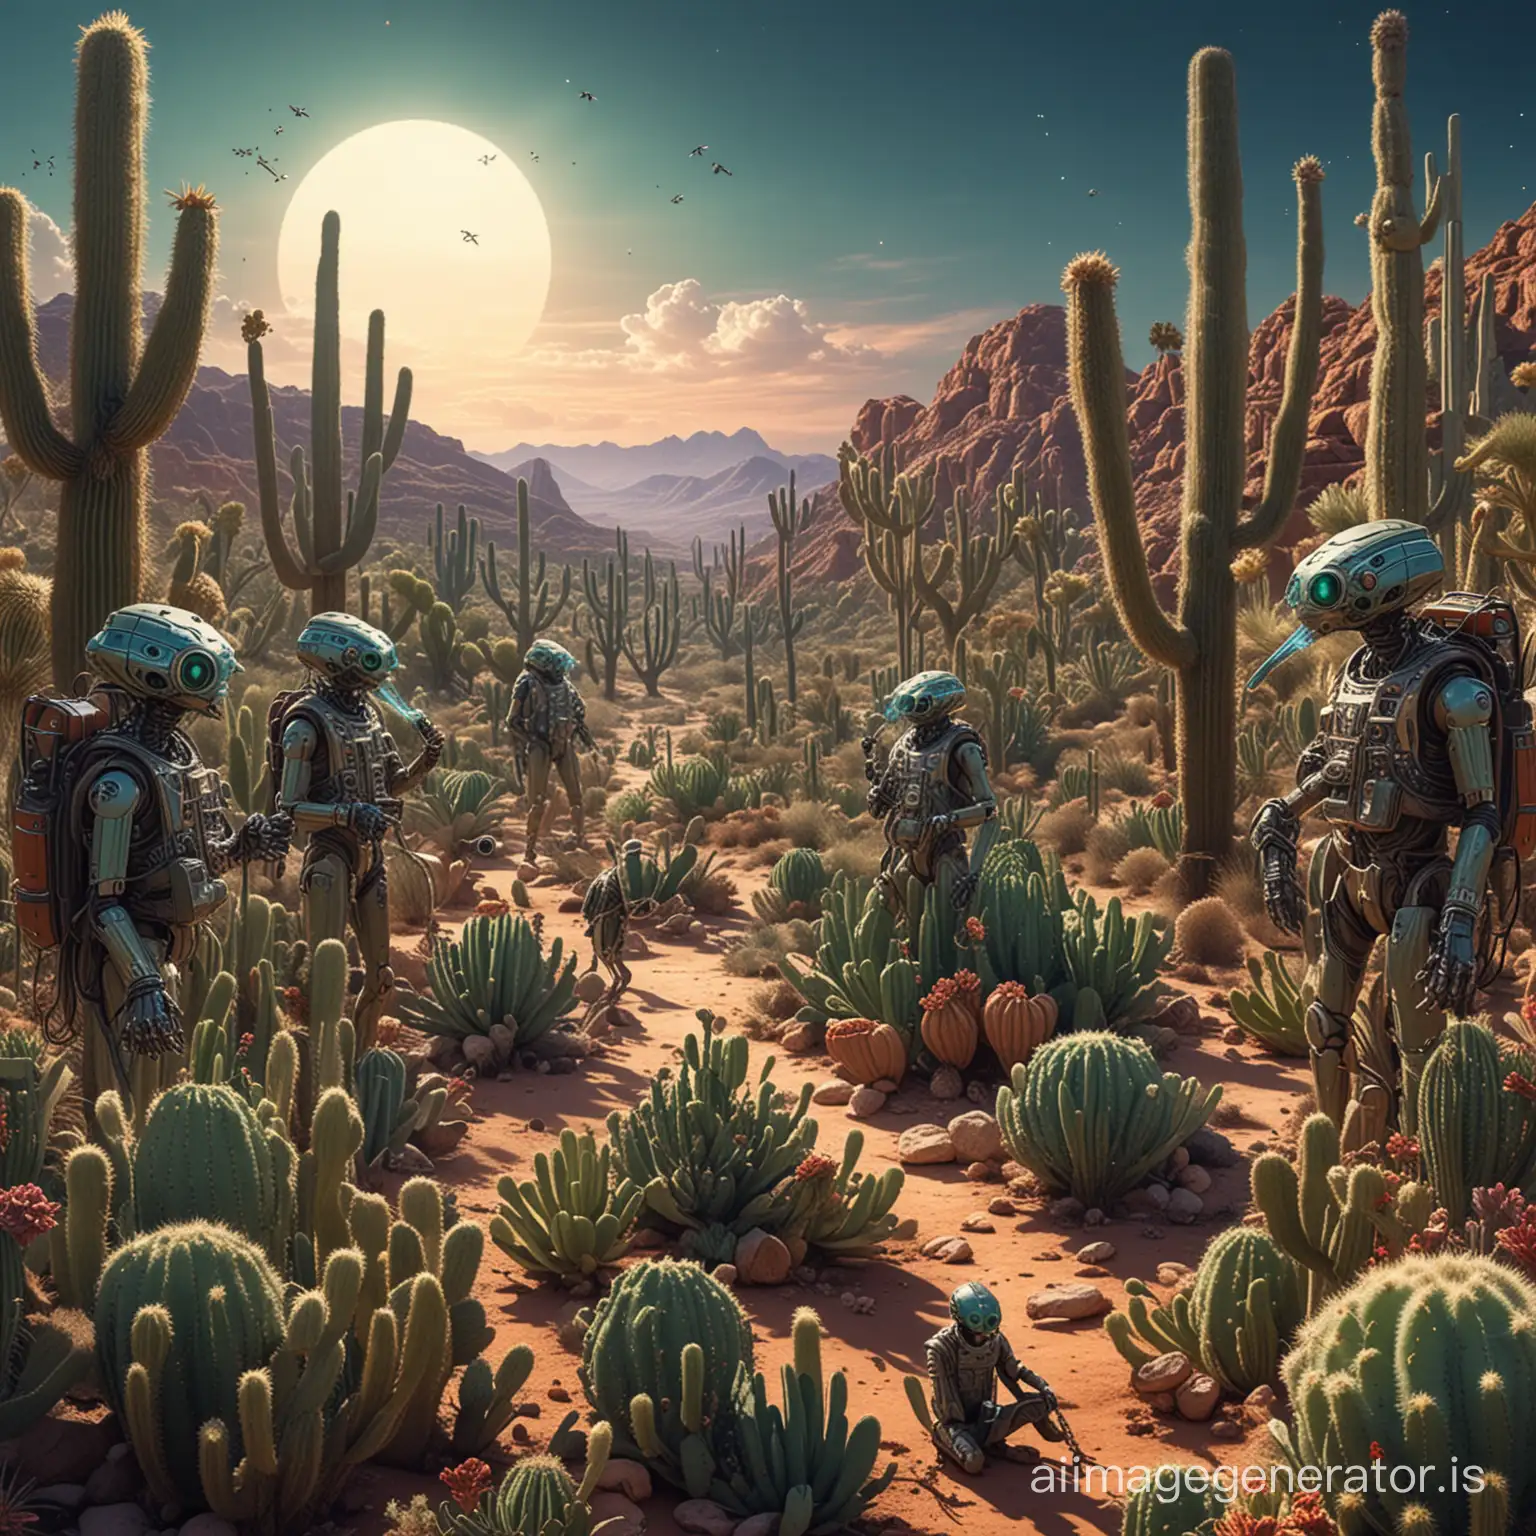 Tribe of alien smokers of DMT surrounded by San Pedro cacti and technological insects playing music on a planet full of marijuana buds